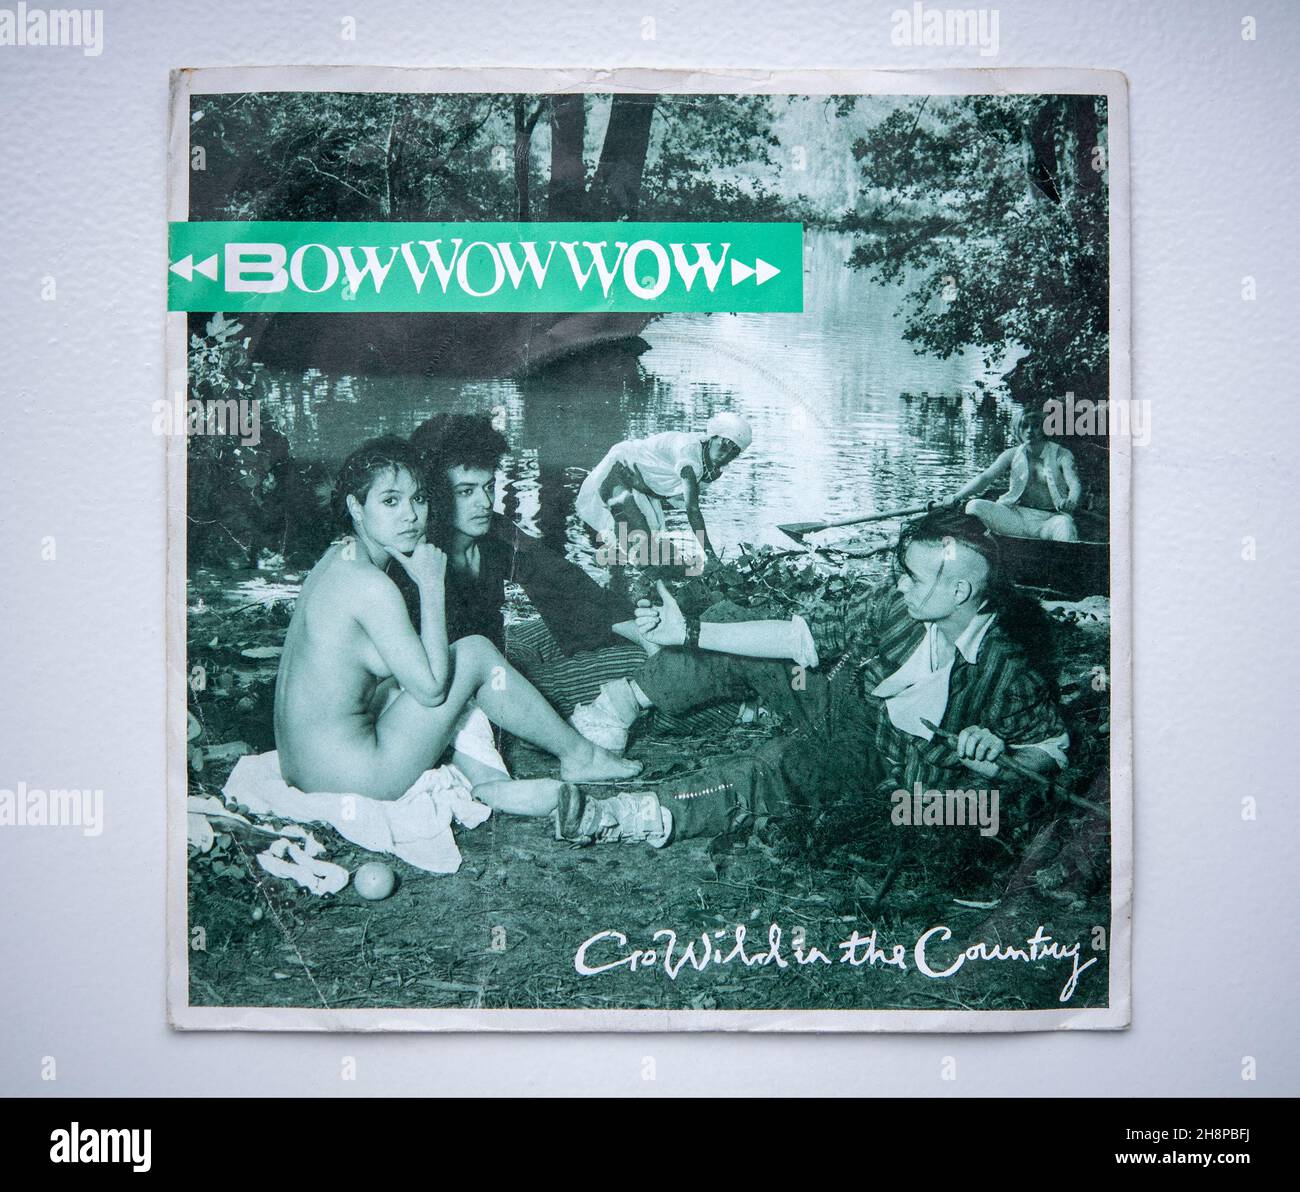 Picture cover of the seven inch single version of Go Wild in the Country by Bow Wow Wow, which was released in 1985 Stock Photo